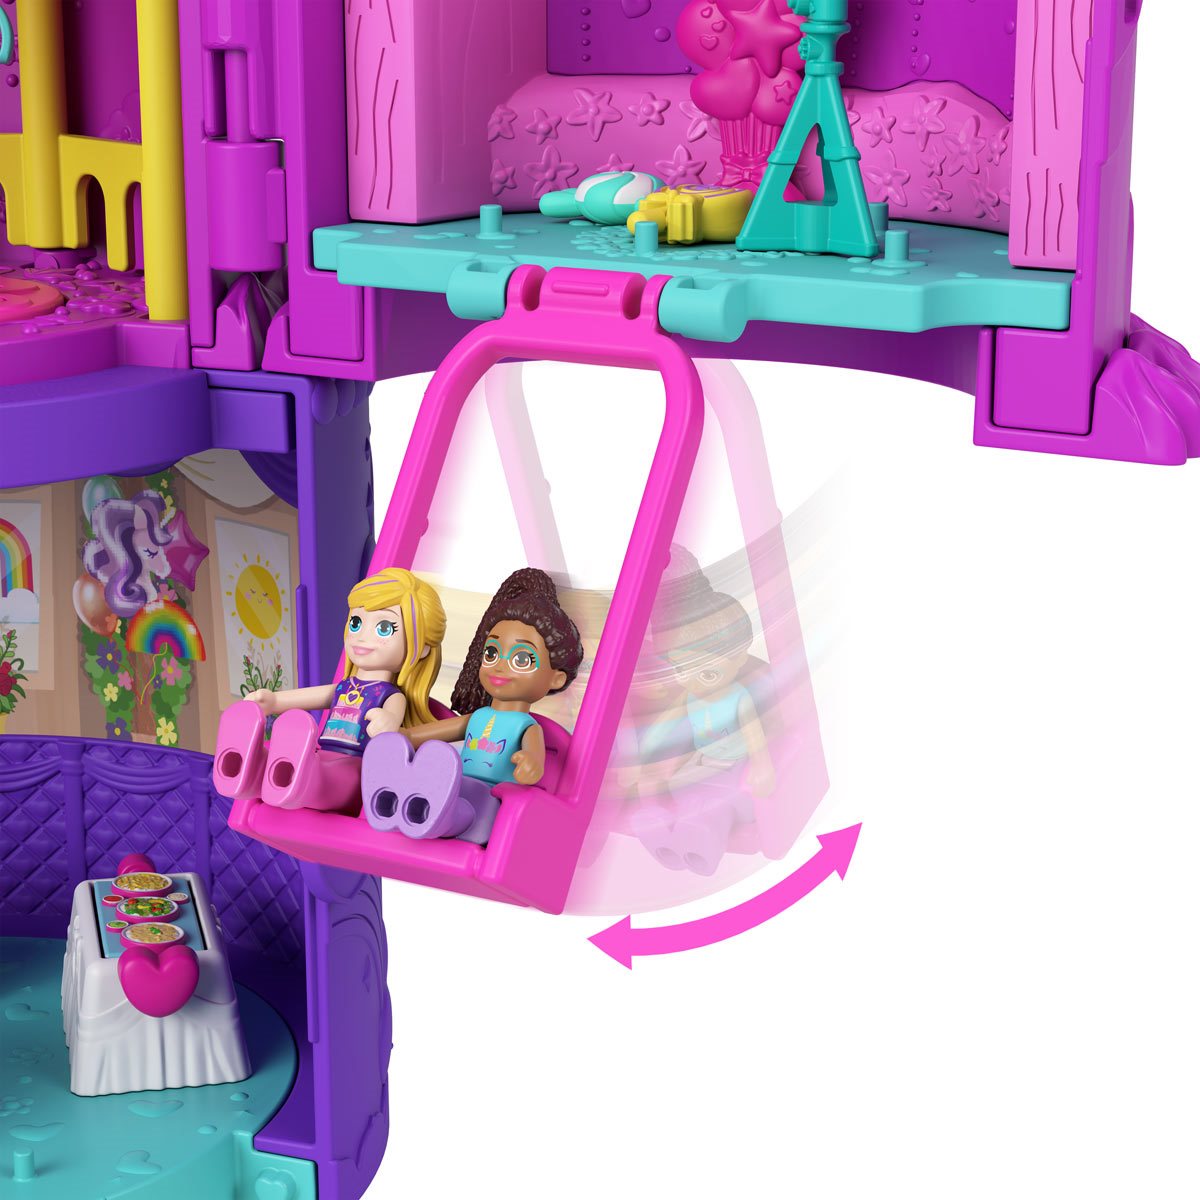 Polly Pocket 2-in-1 Spin 'n Surprise Birthday, Unicorn Toy with 2